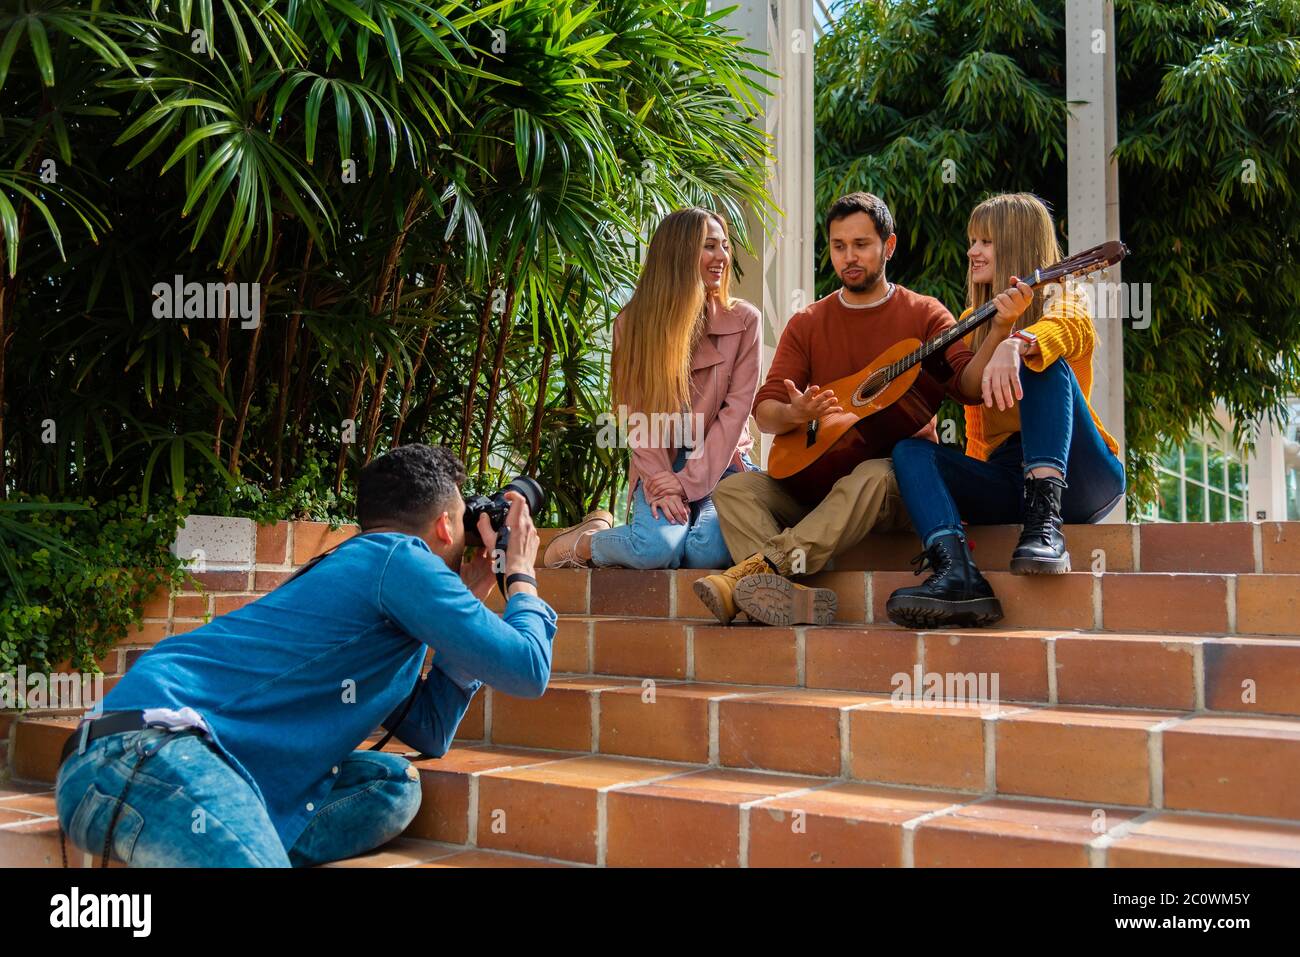 A musician with a guitar and two young girls pose on a staircase next to some trees for a photographer, space for text and natural light Stock Photo